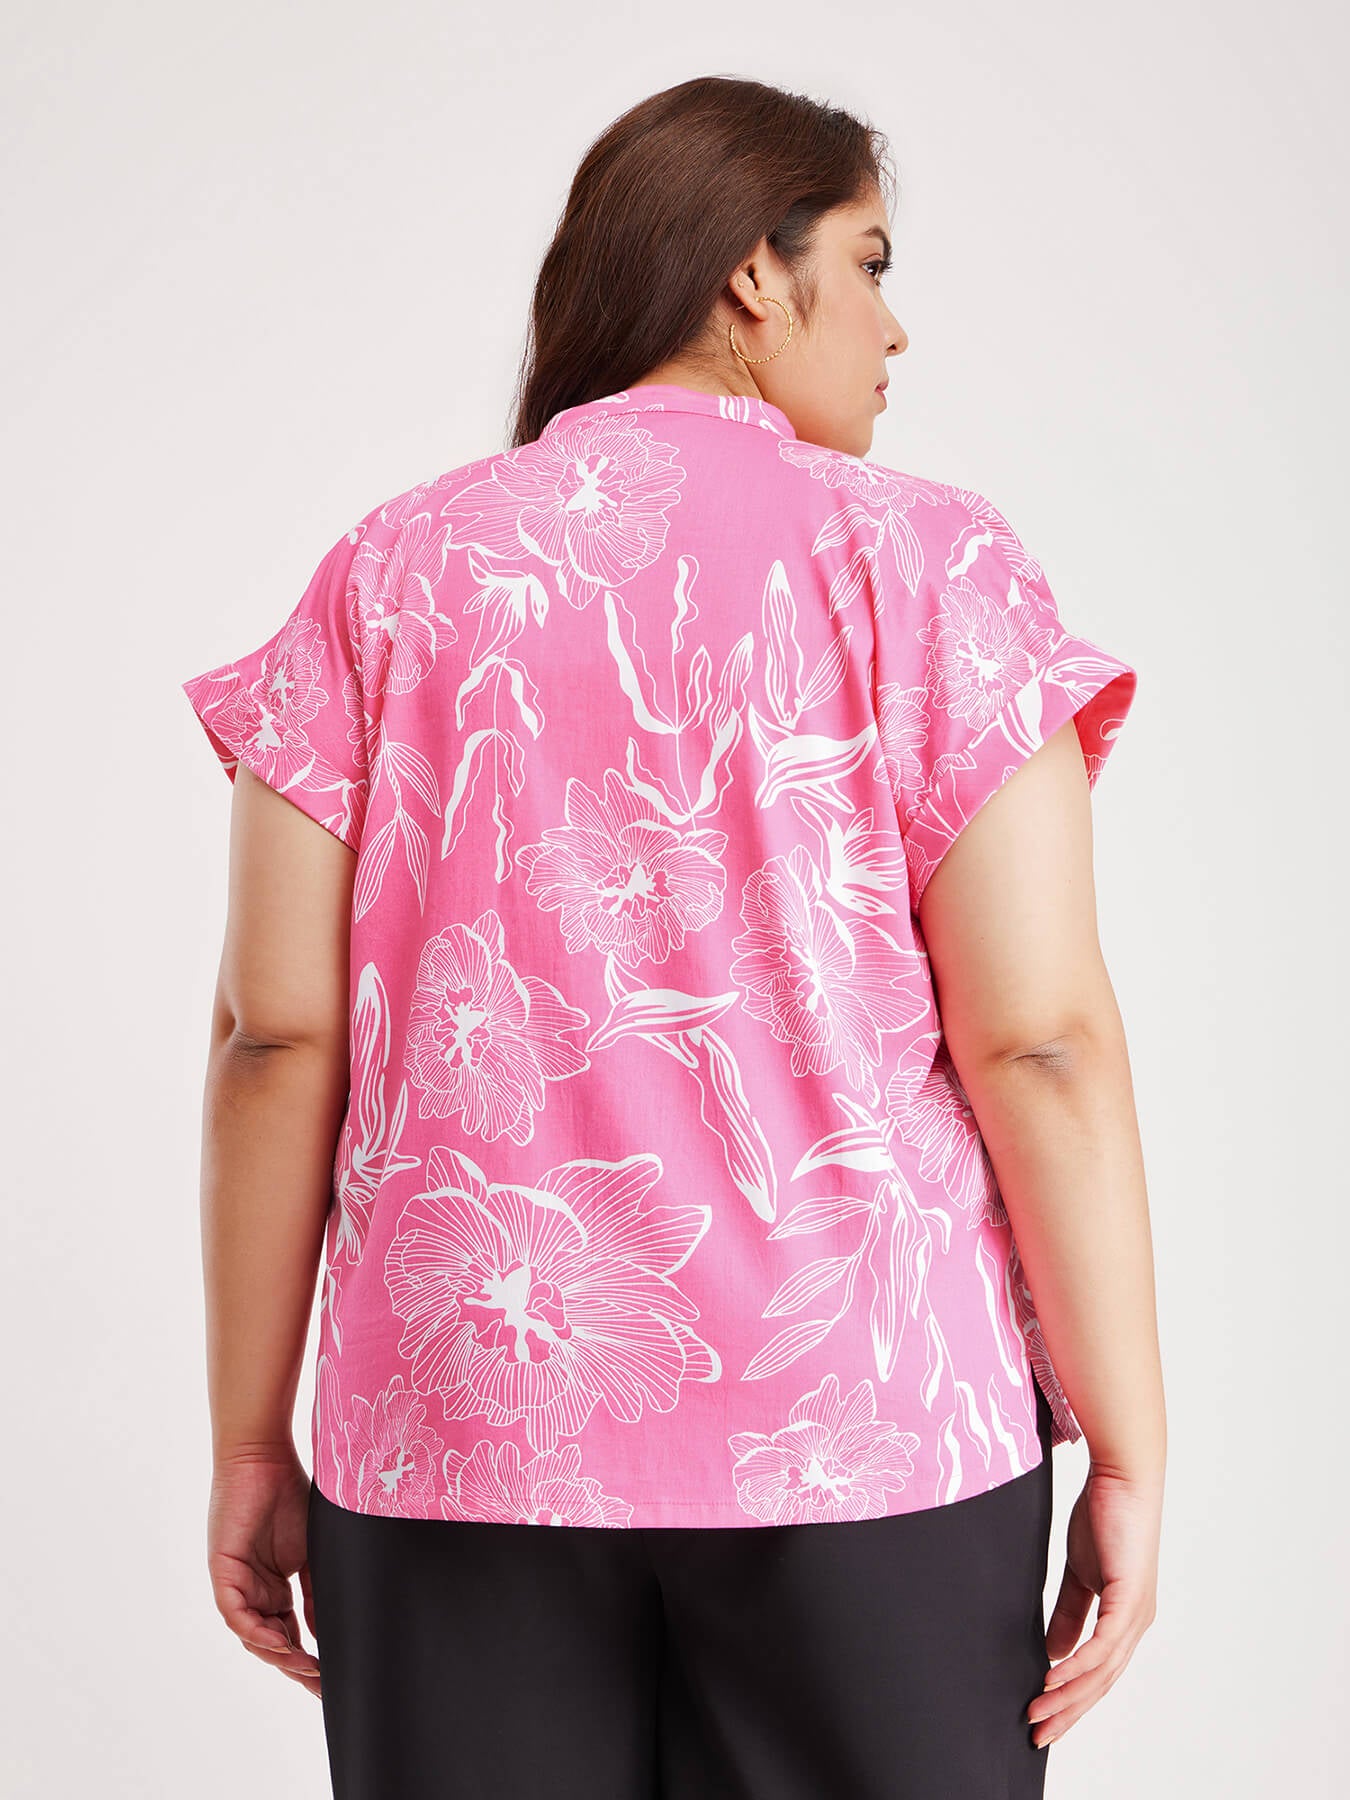 Cotton Drop Shoulder Top - Pink And White